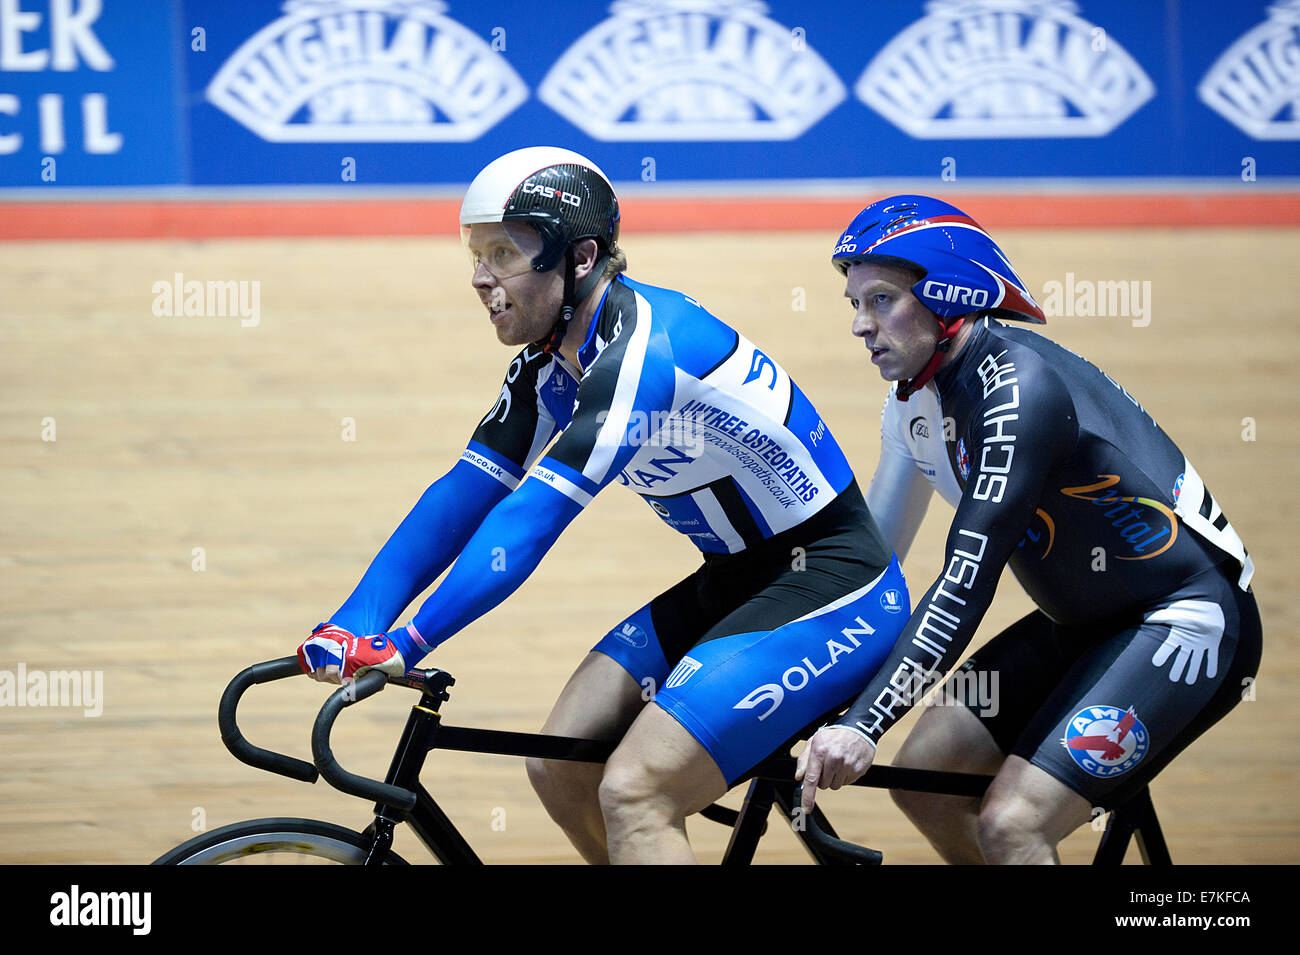 Craig MacLean and Anthony Kappes tandem racing at Manchester velodrome  Stock Photo - Alamy